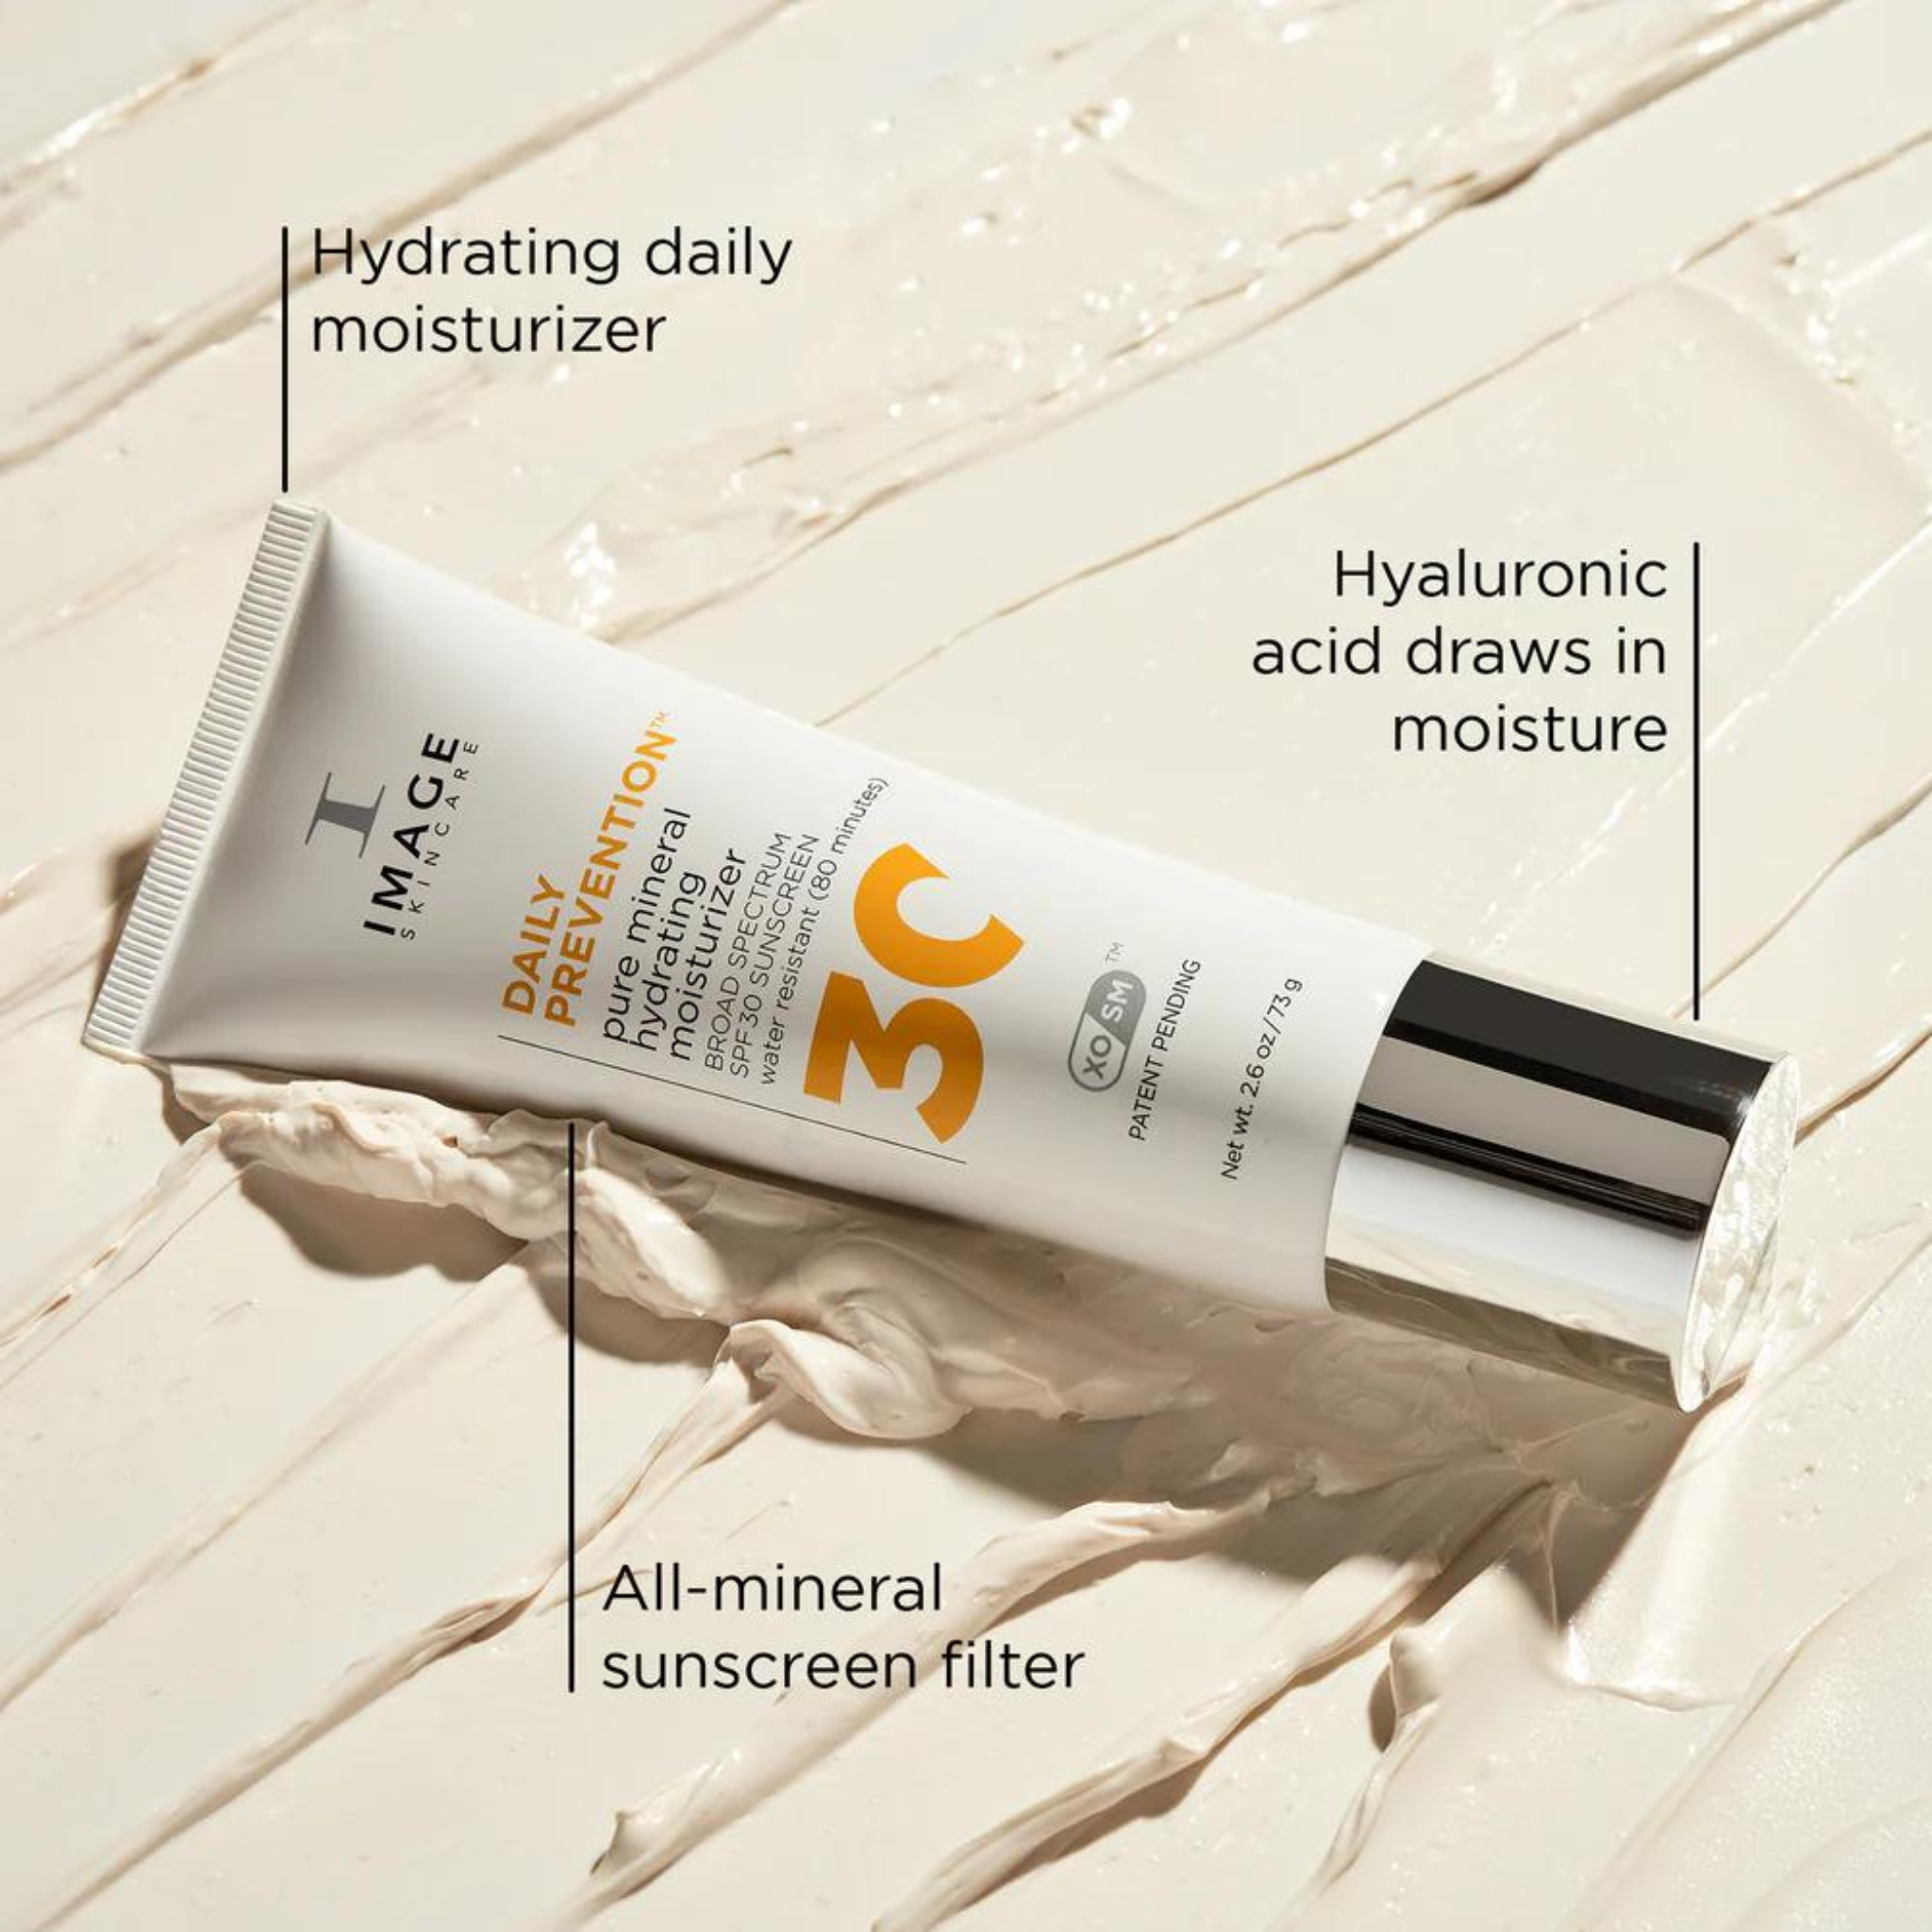 DAILY PREVENTION Pure Mineral Hydrating Moisturiser SPF30 Features